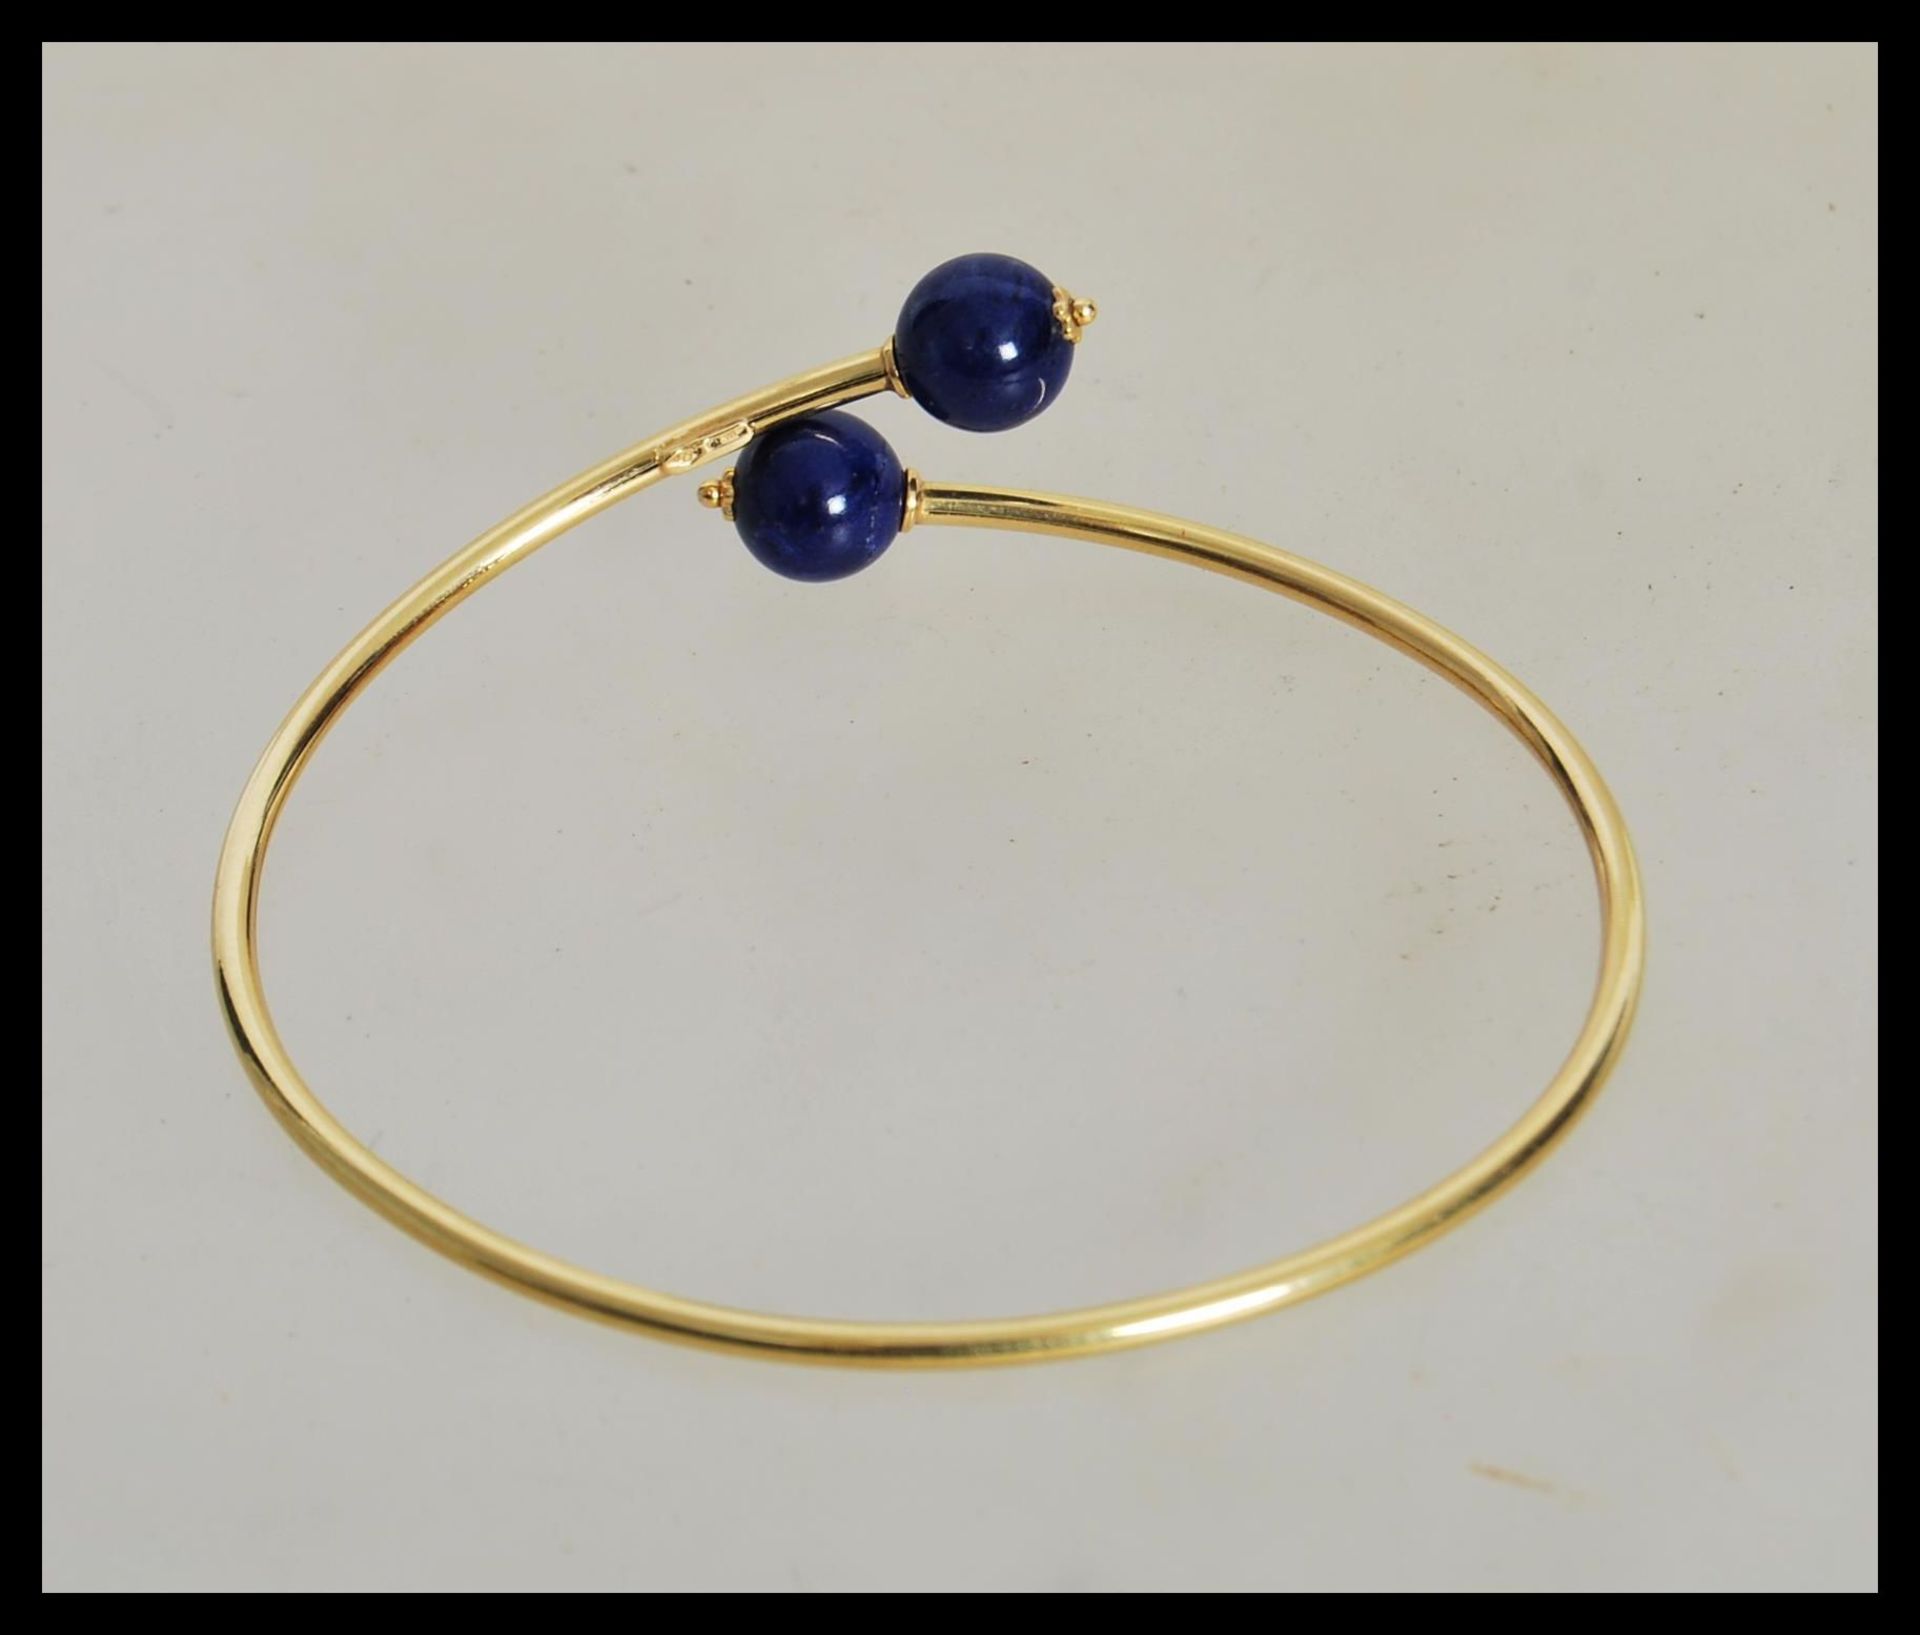 A stamped 750 18ct gold bangle bracelet finished with two blue bead stoppers. Weight 4.3g. - Image 3 of 3